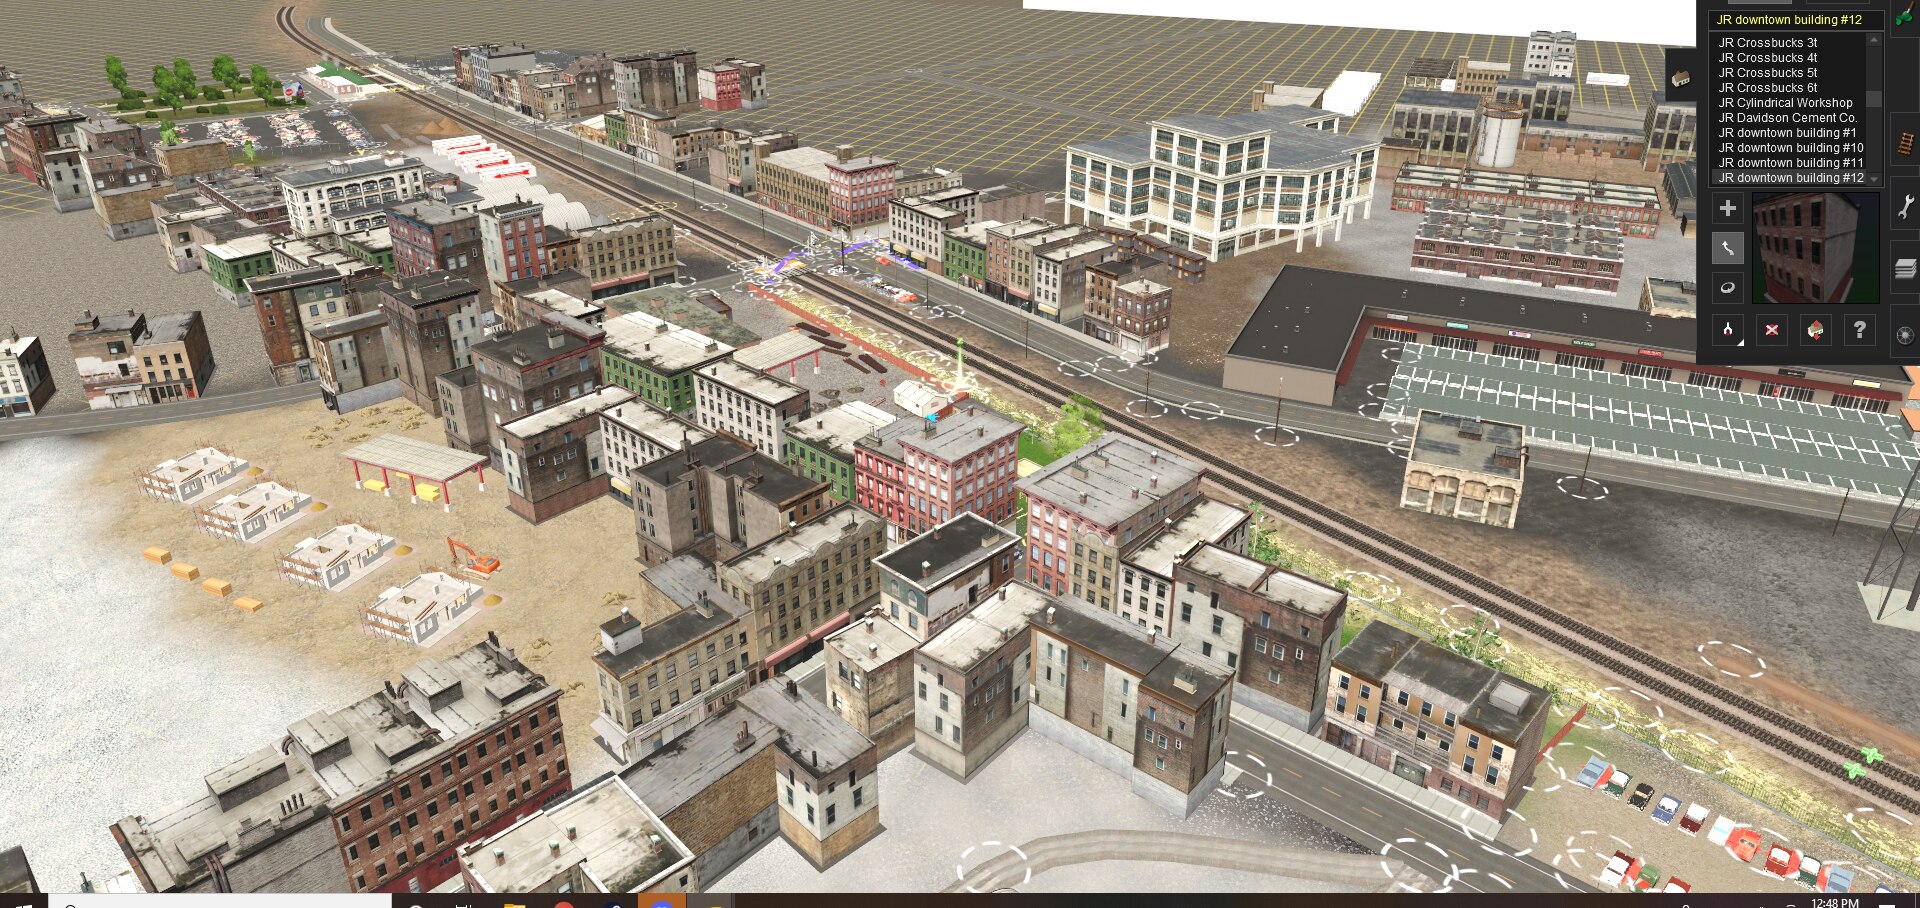 Immersive NY - GTA IV Immersion Overhaul Beta 0.03 at Grand Theft